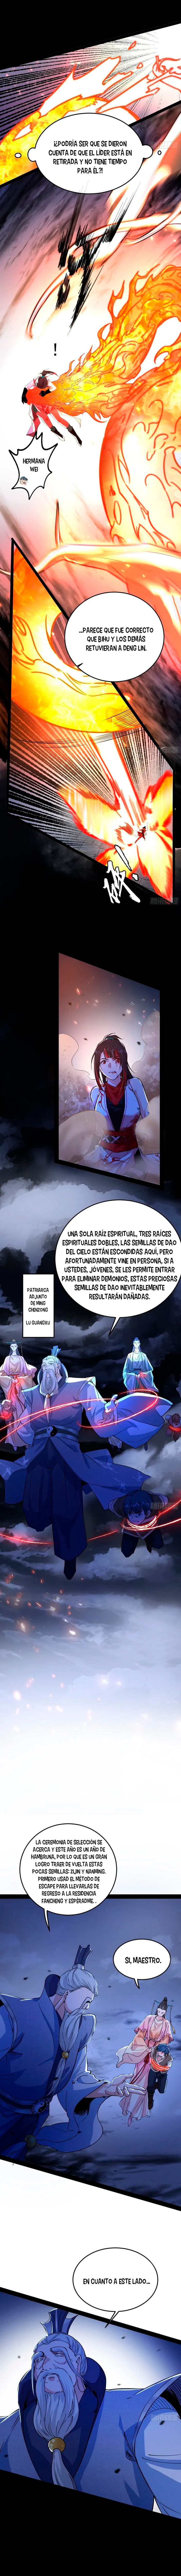 Manga Soy un dios maligno Chapter 321 image number 3